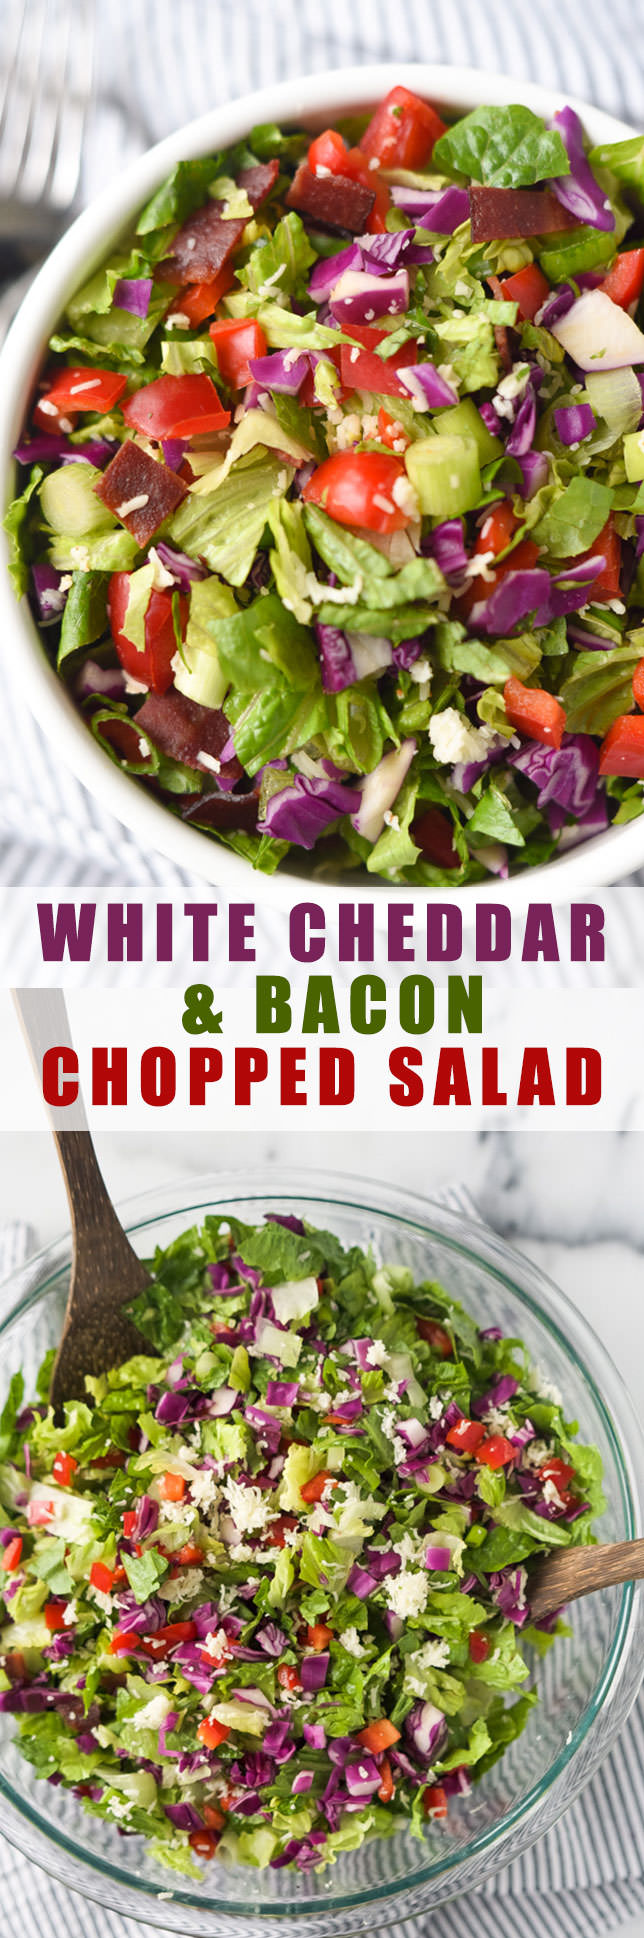 White Cheddar and Bacon Chopped Salad